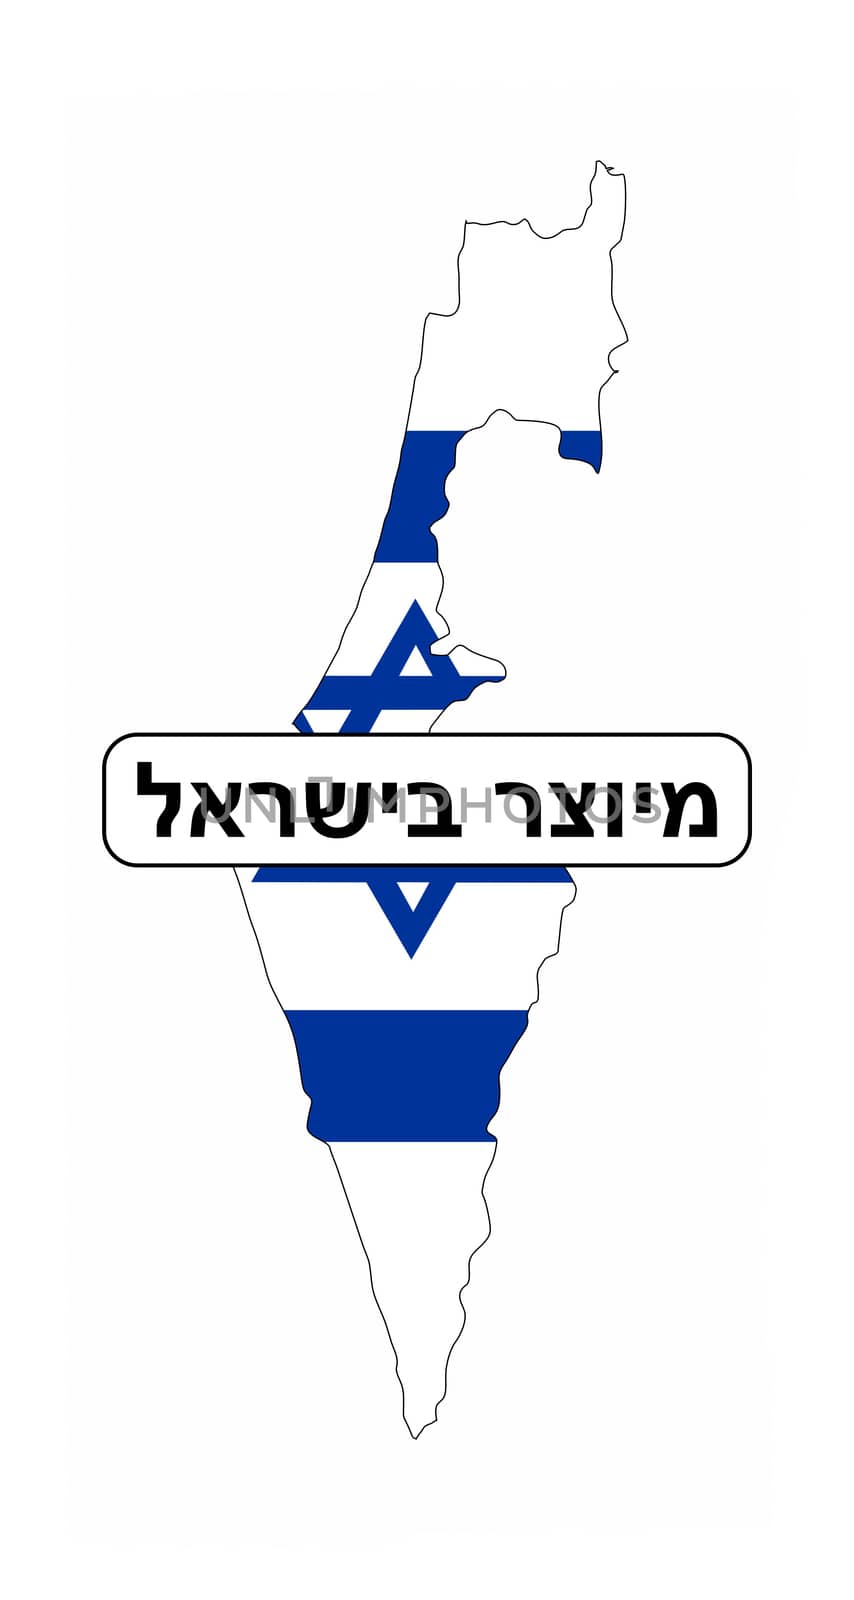 made in israel country national flag map shape with text